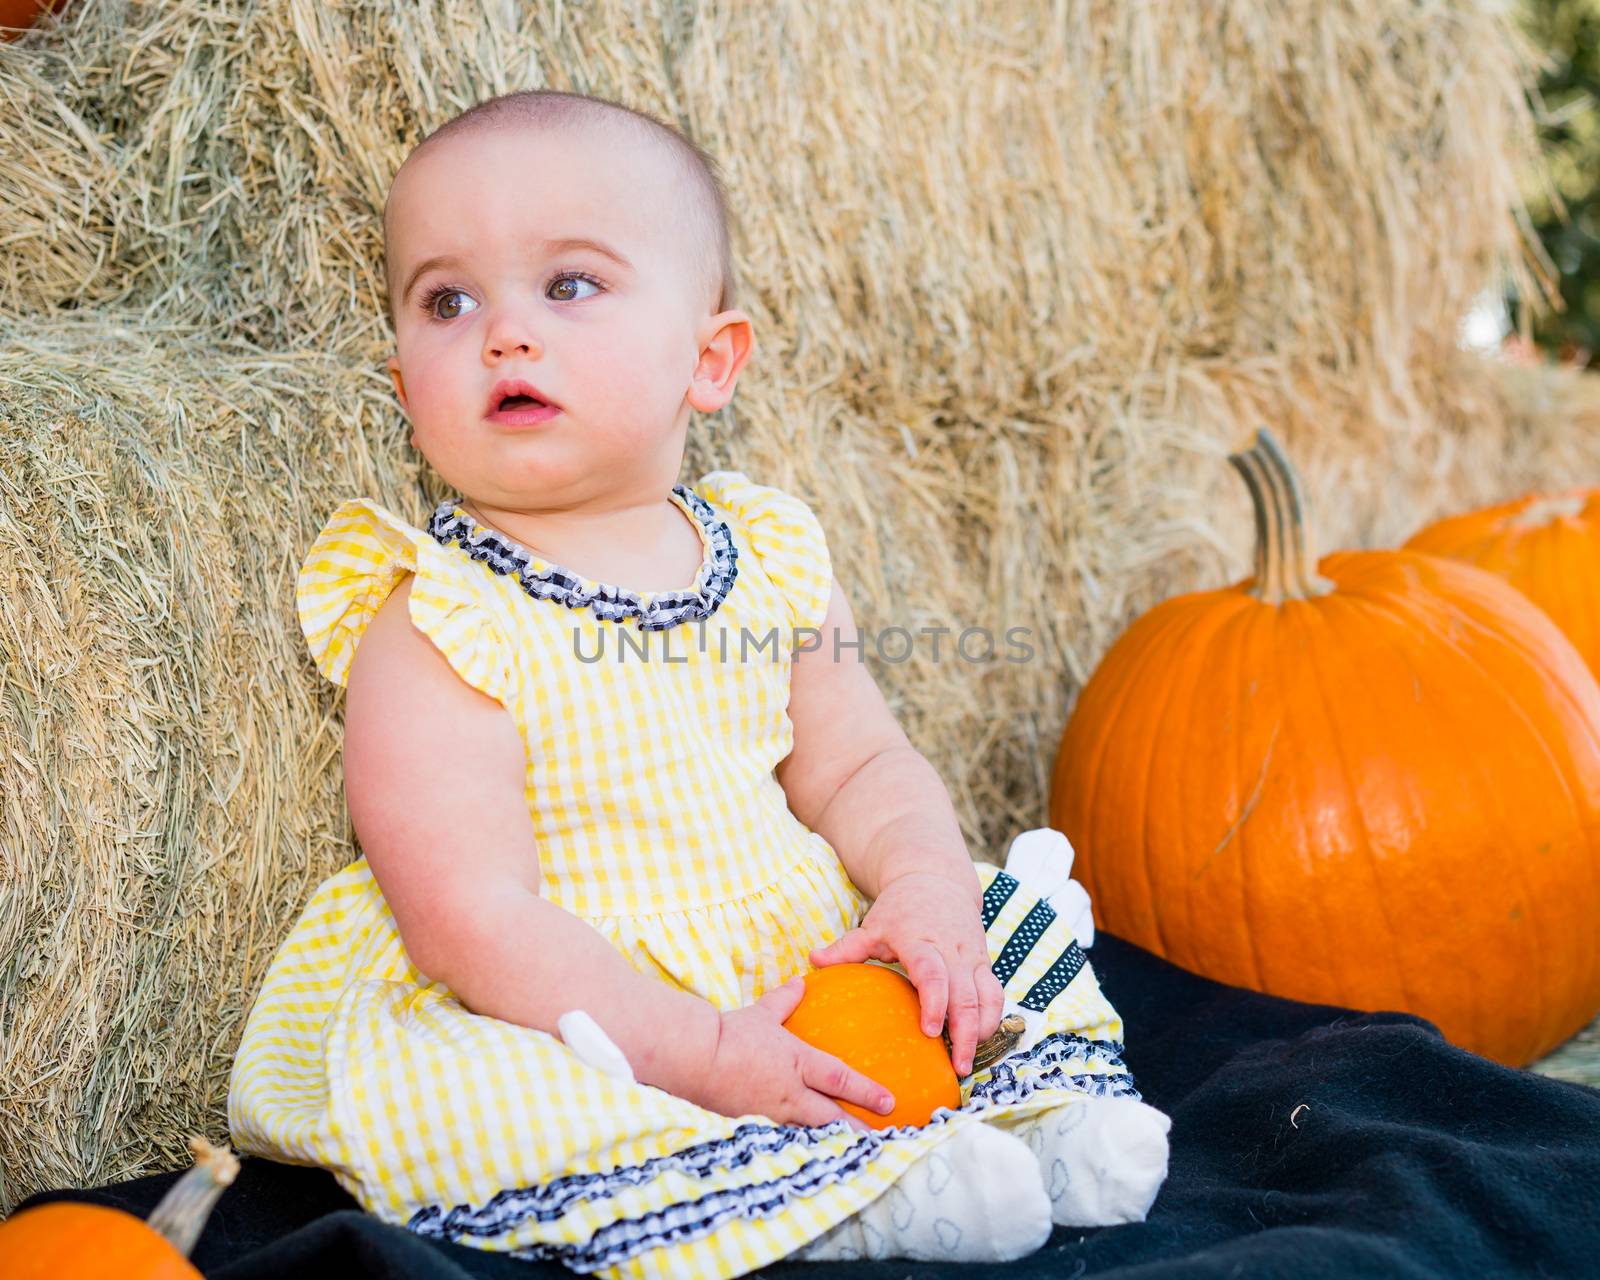 Adorable Baby sitting by pumpkins in the autumn